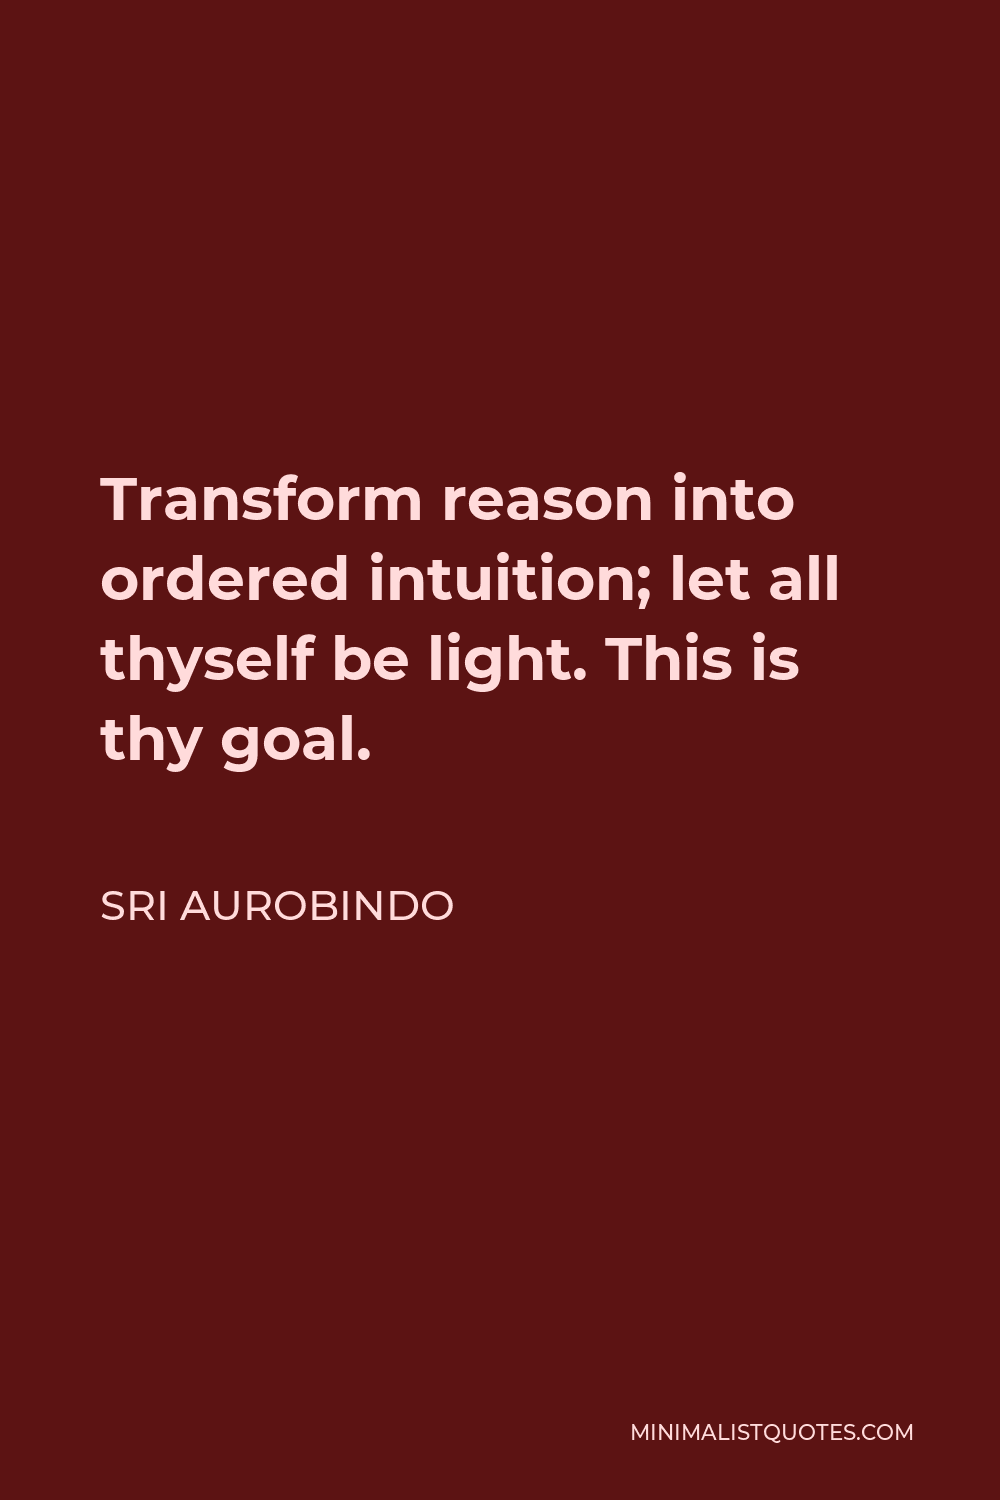 Sri Aurobindo Quote - Transform reason into ordered intuition; let all thyself be light. This is thy goal.